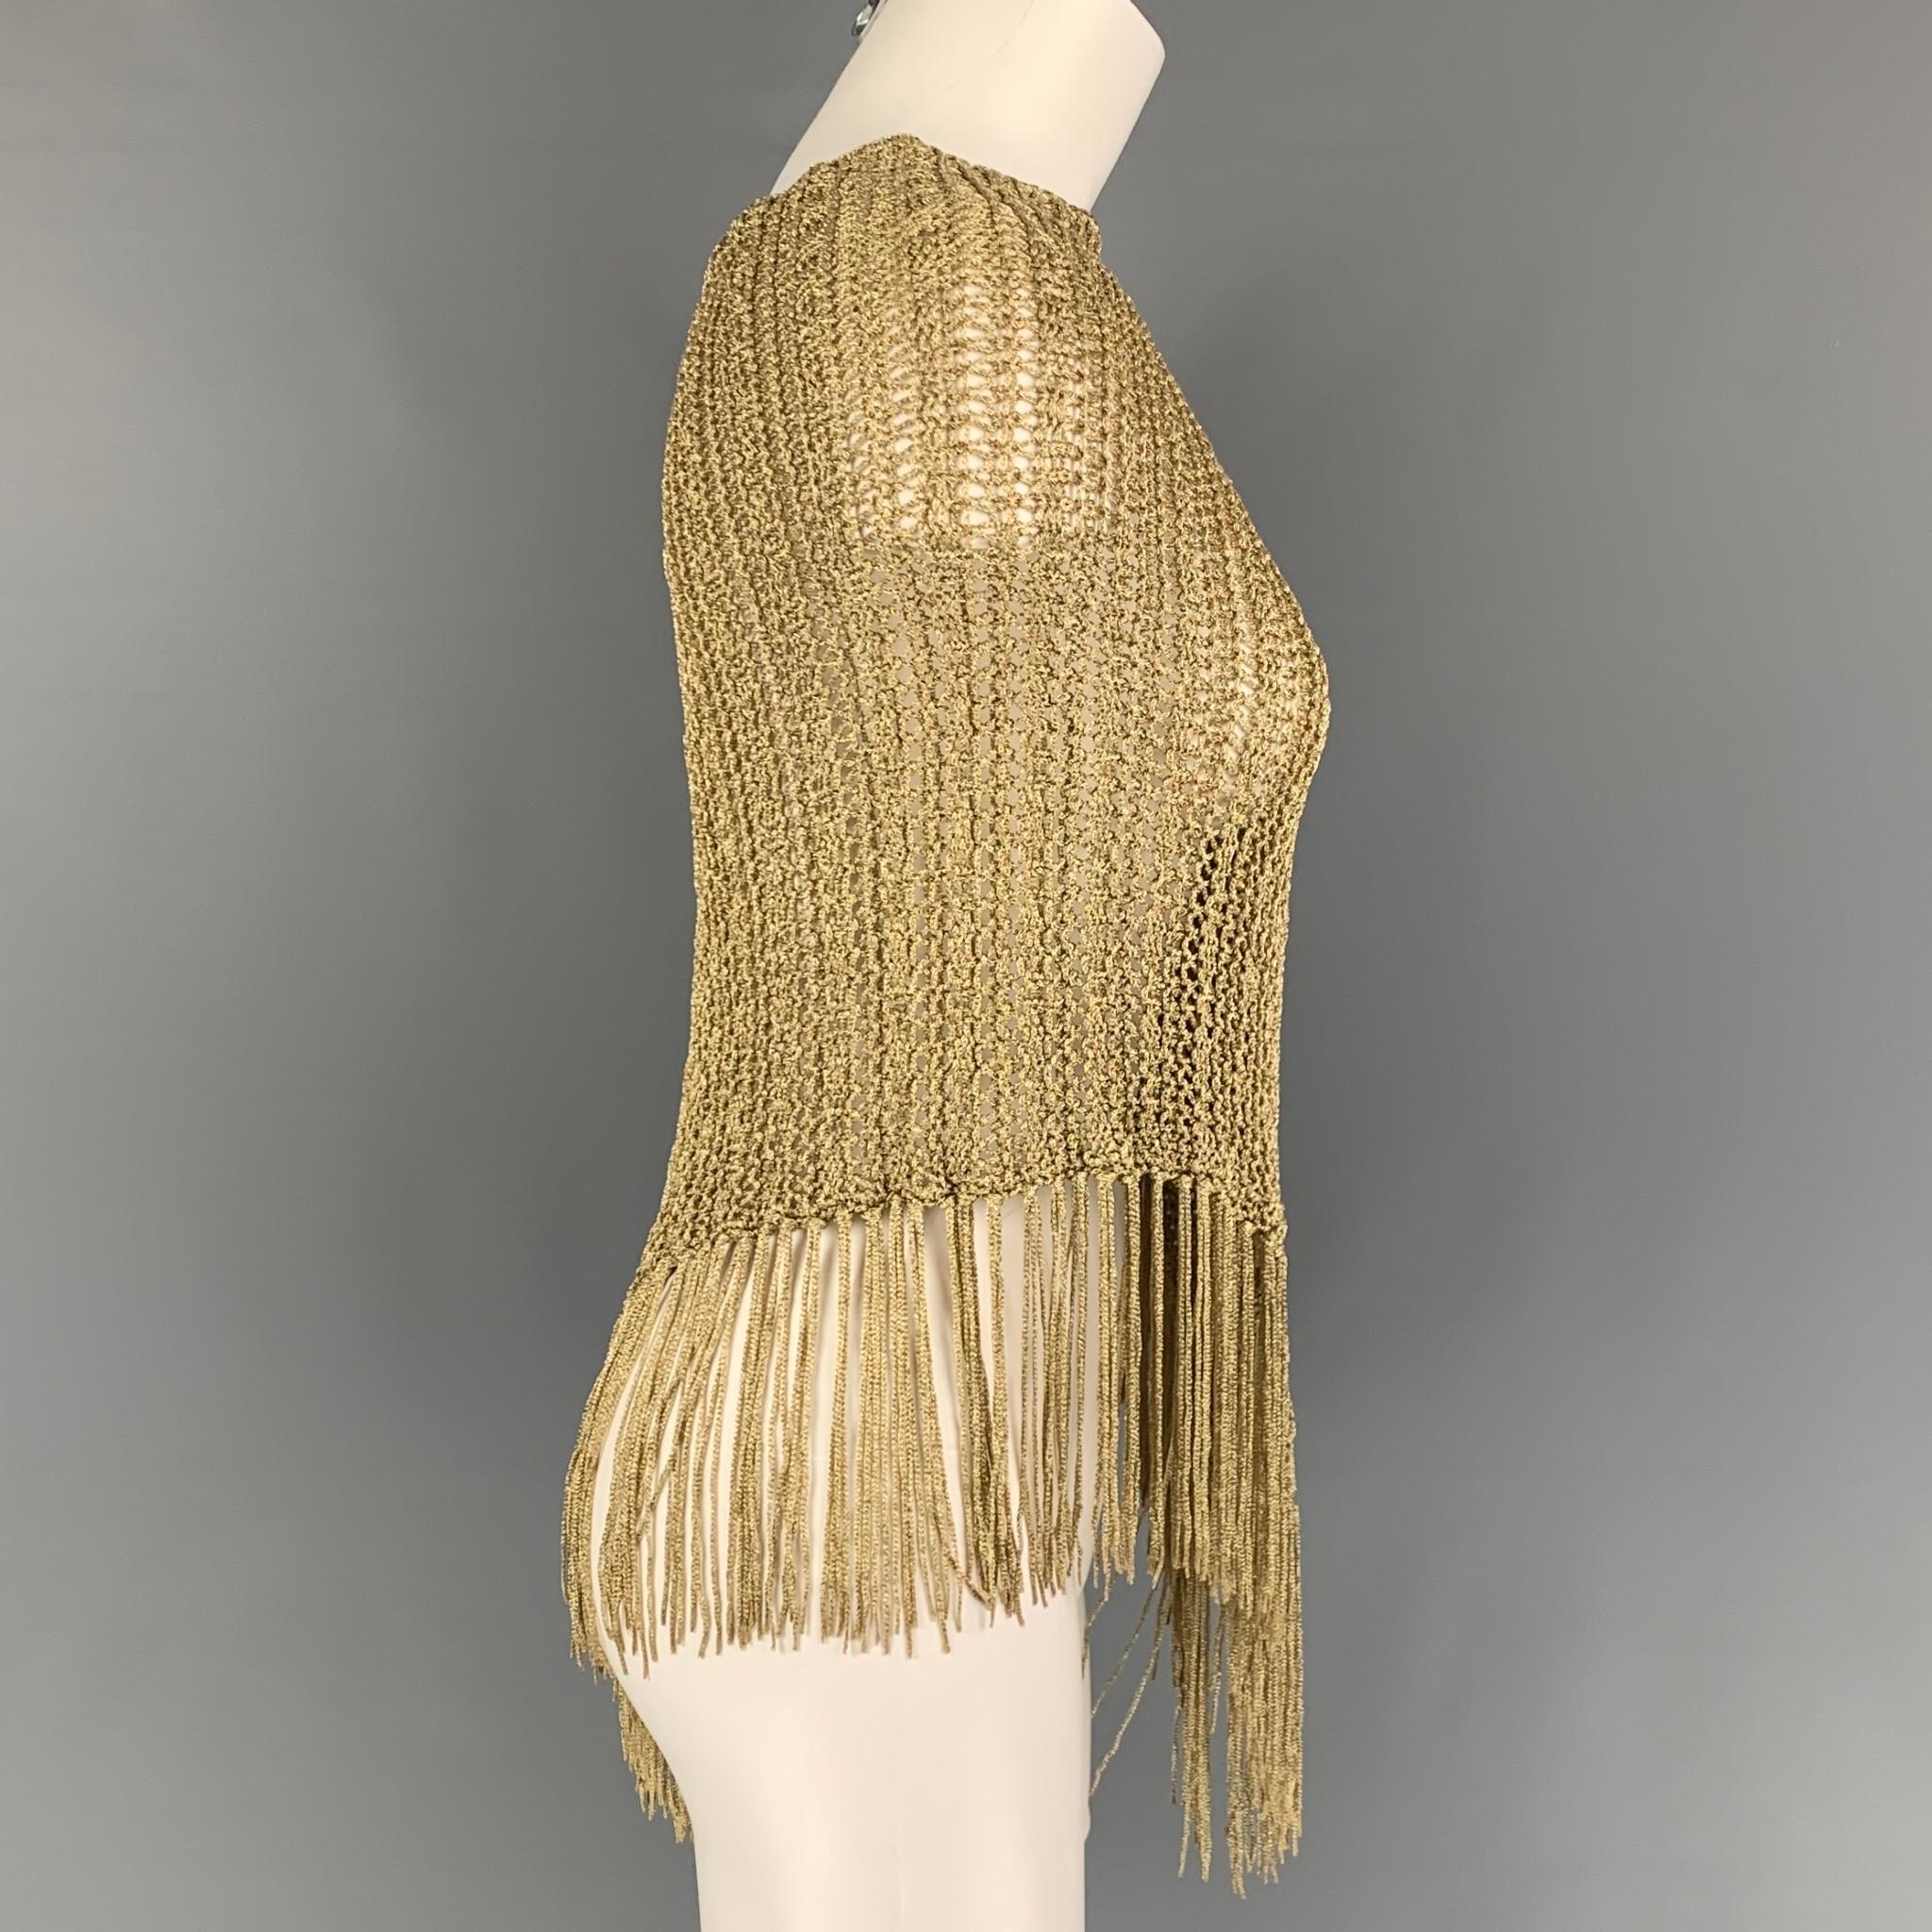 RALPH LAUREN 'Black Label' cape comes in a gold mesh viscose featuring a fringe trim. 

Very Good Pre-Owned Condition.
Marked: XS/S

Measurements:

Length: 30.5 in. 